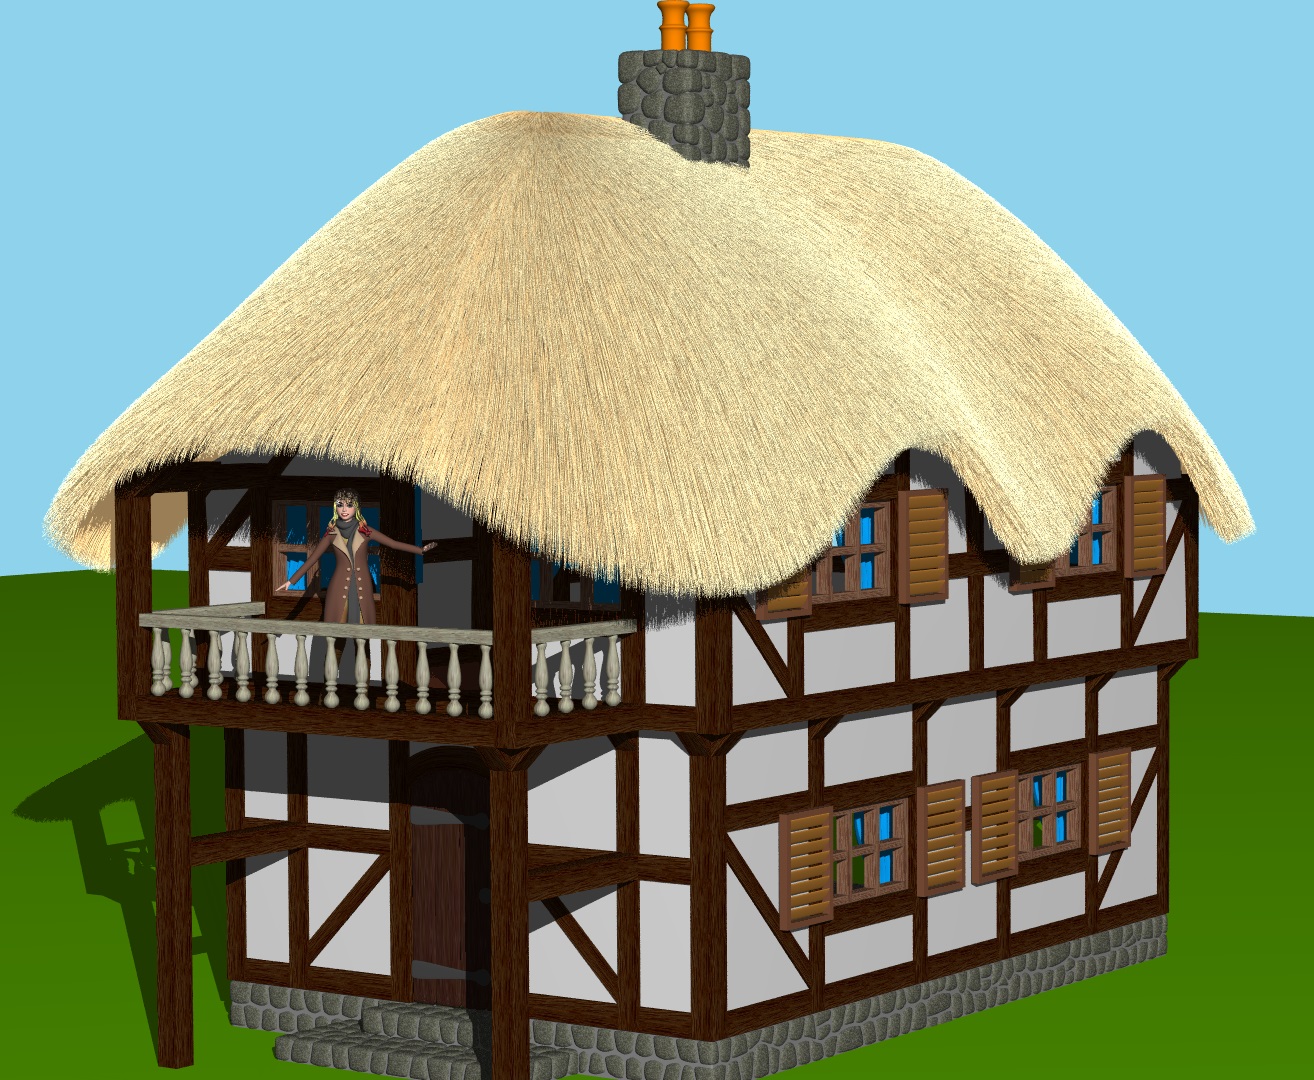 Tudor/Medieval Thatched Roof House